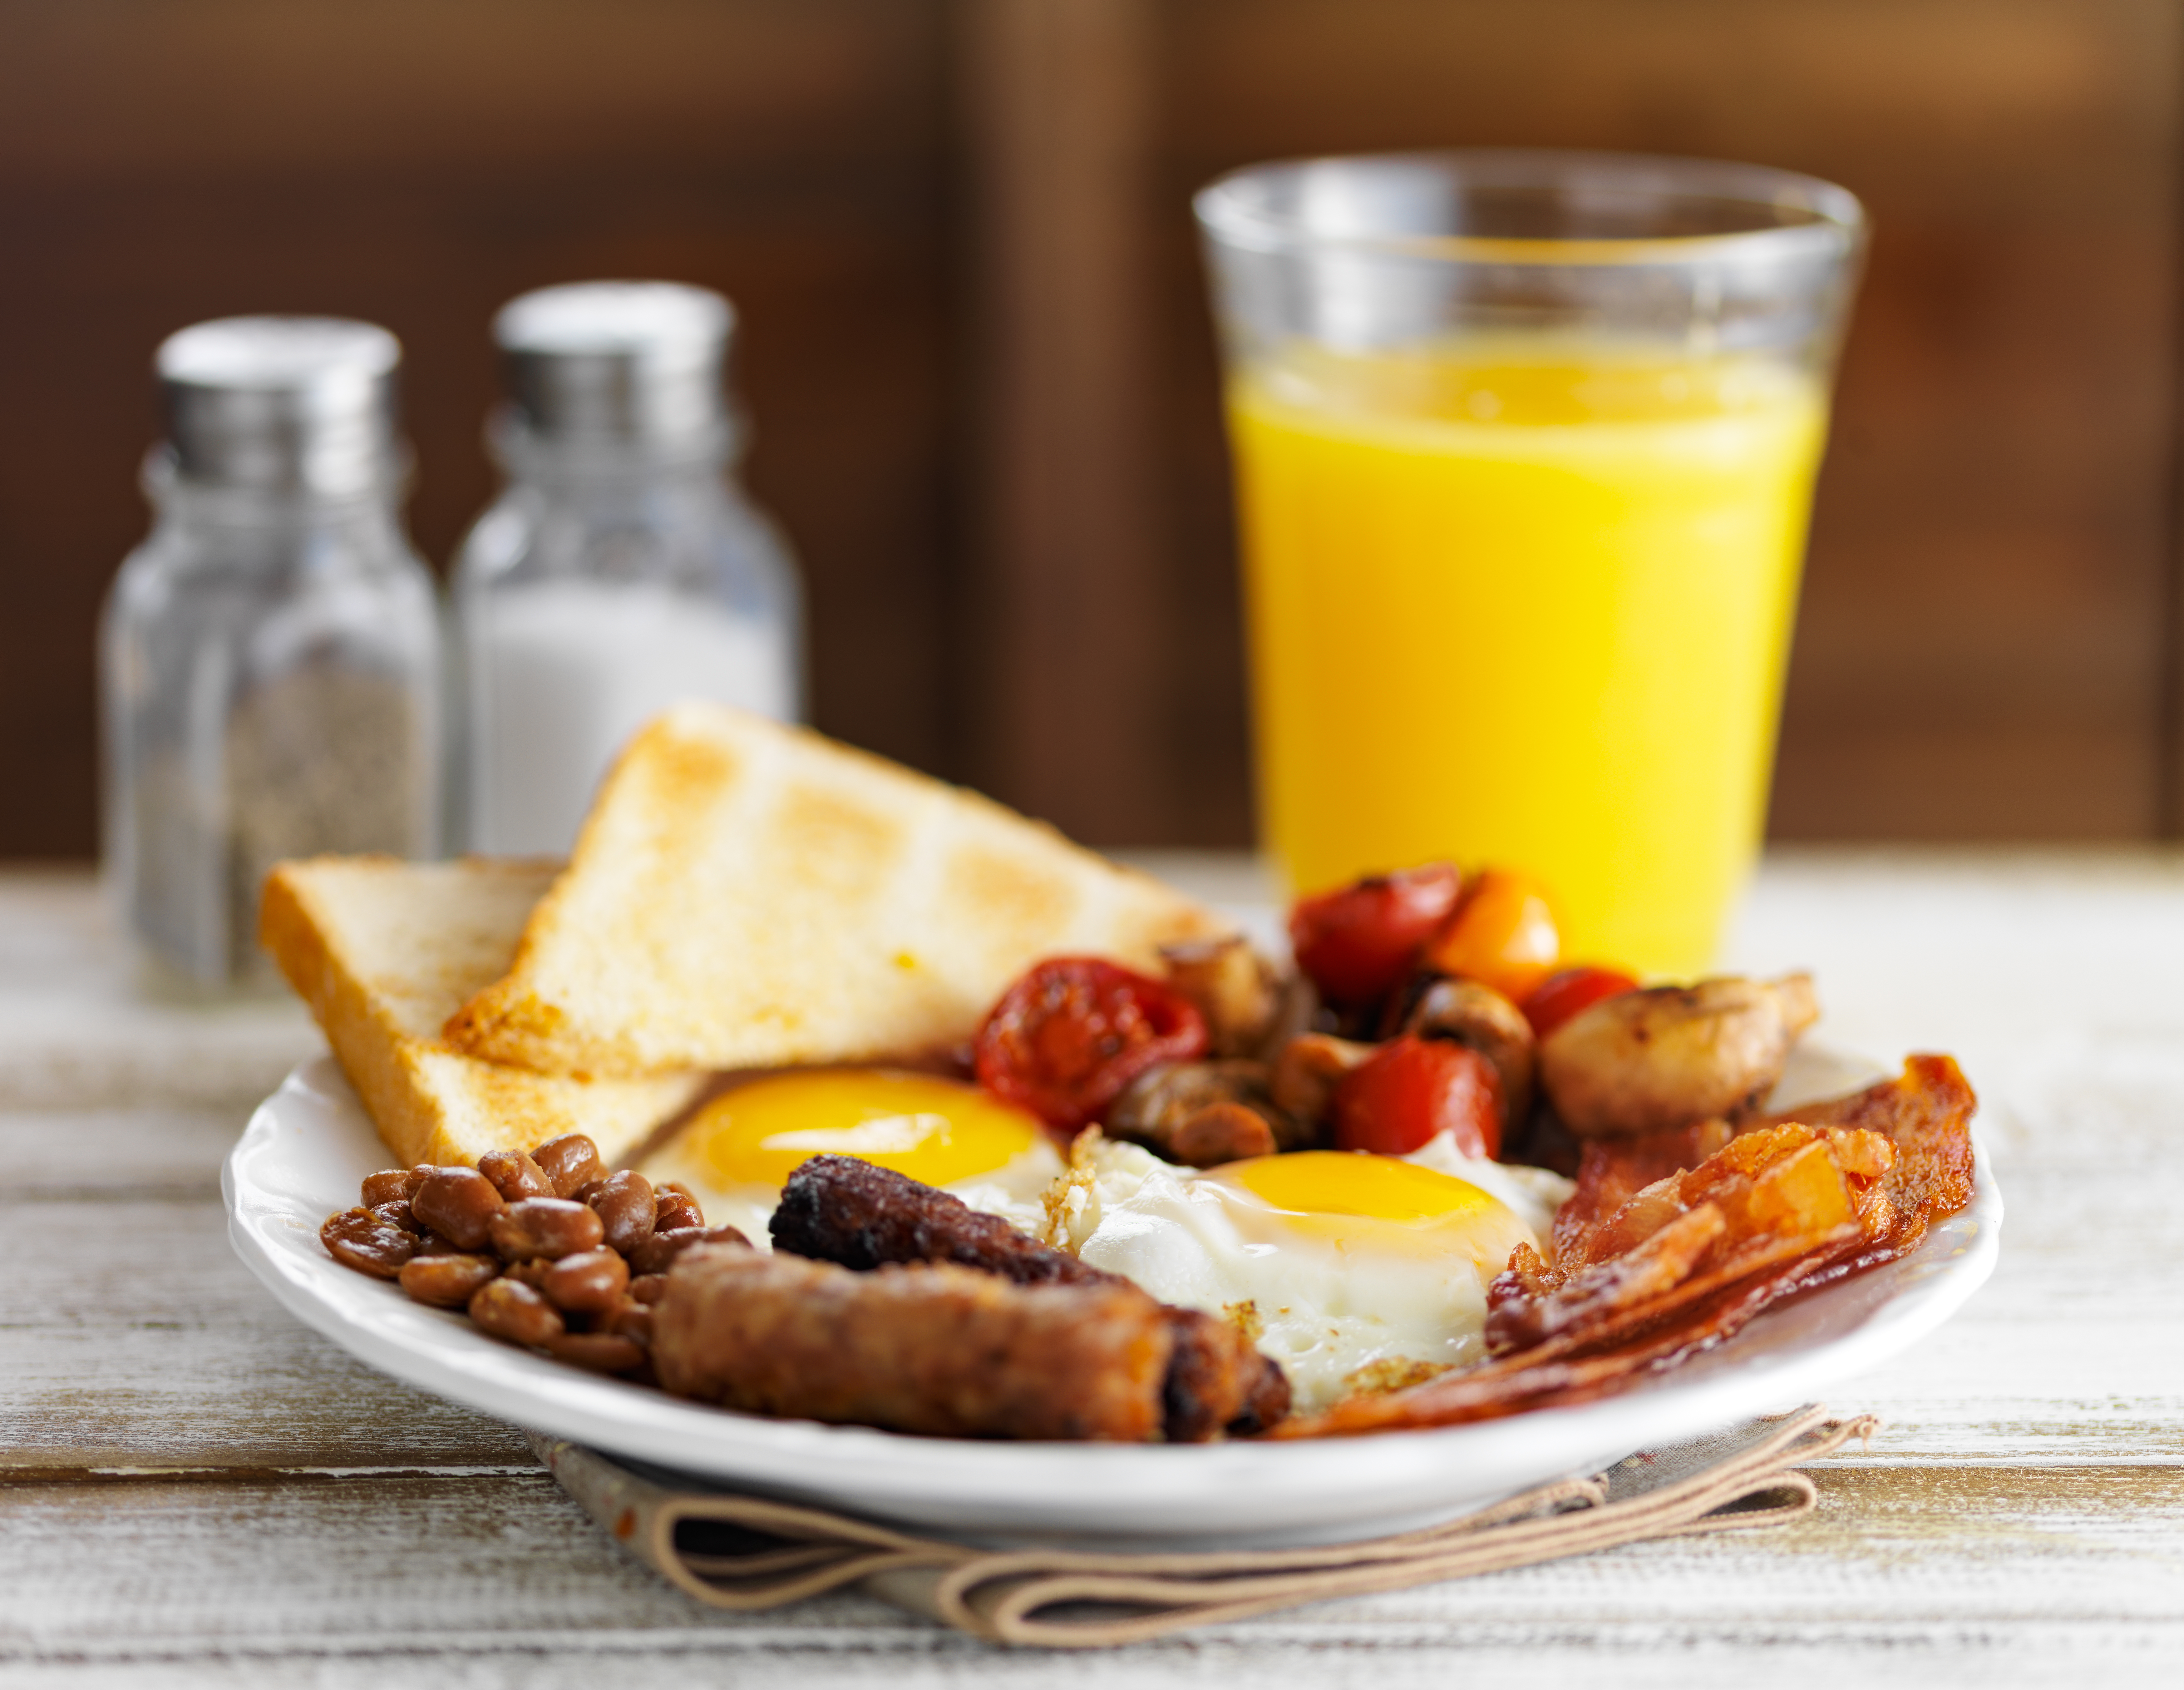 classic english breakfast on rustic table top served with orange juice